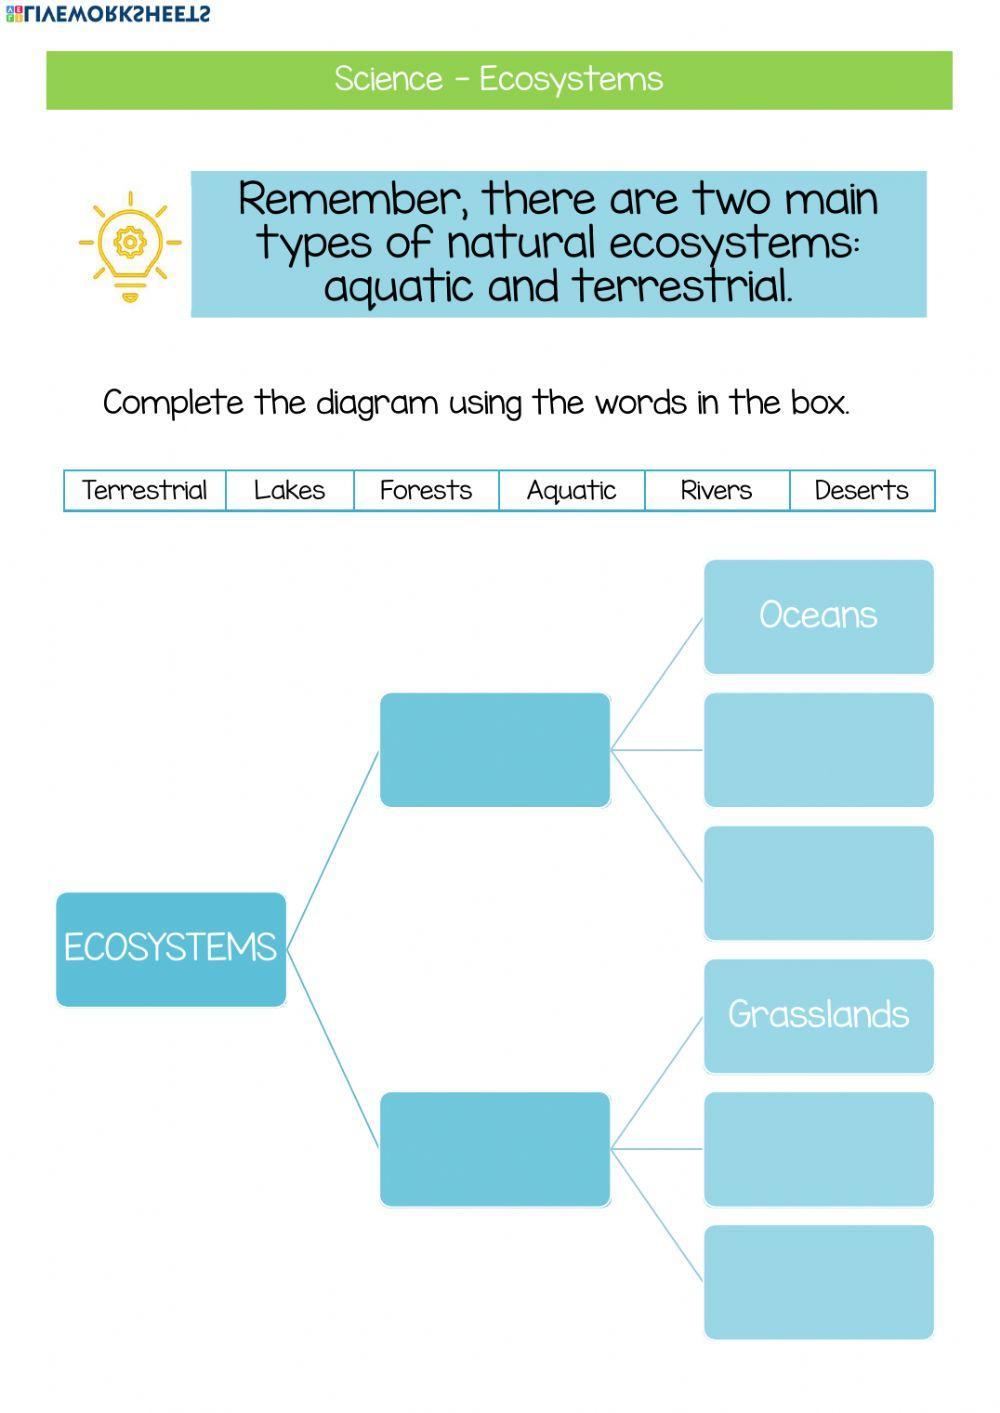 Complete the diagram using the words in the box.